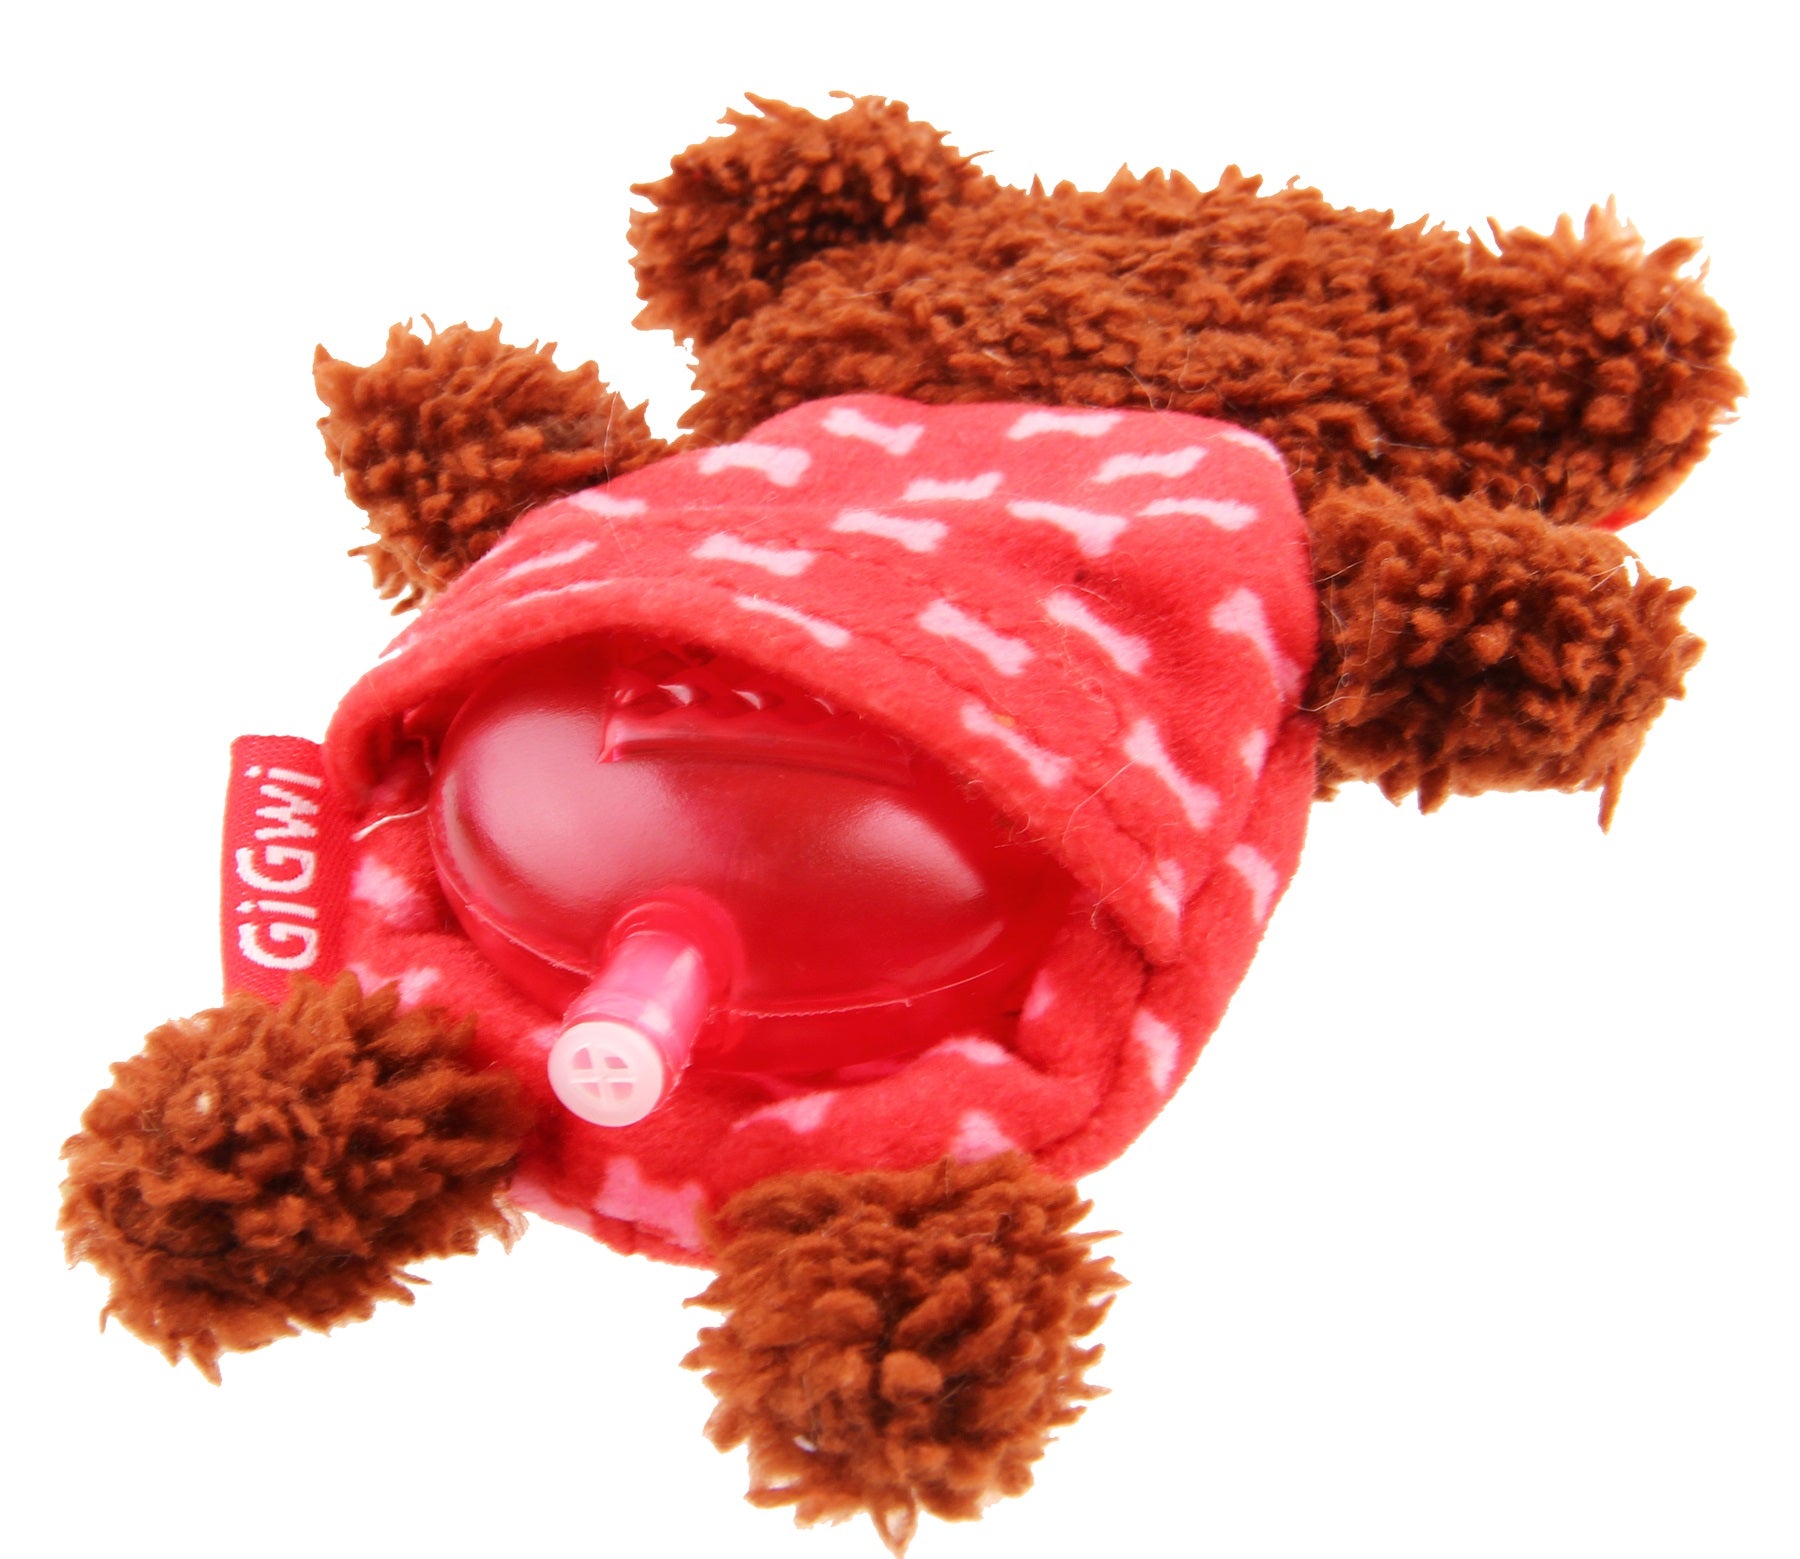 Gigwi Bear Plush Friendz With Refillable Squeaker Dog Toy - Brown/Red